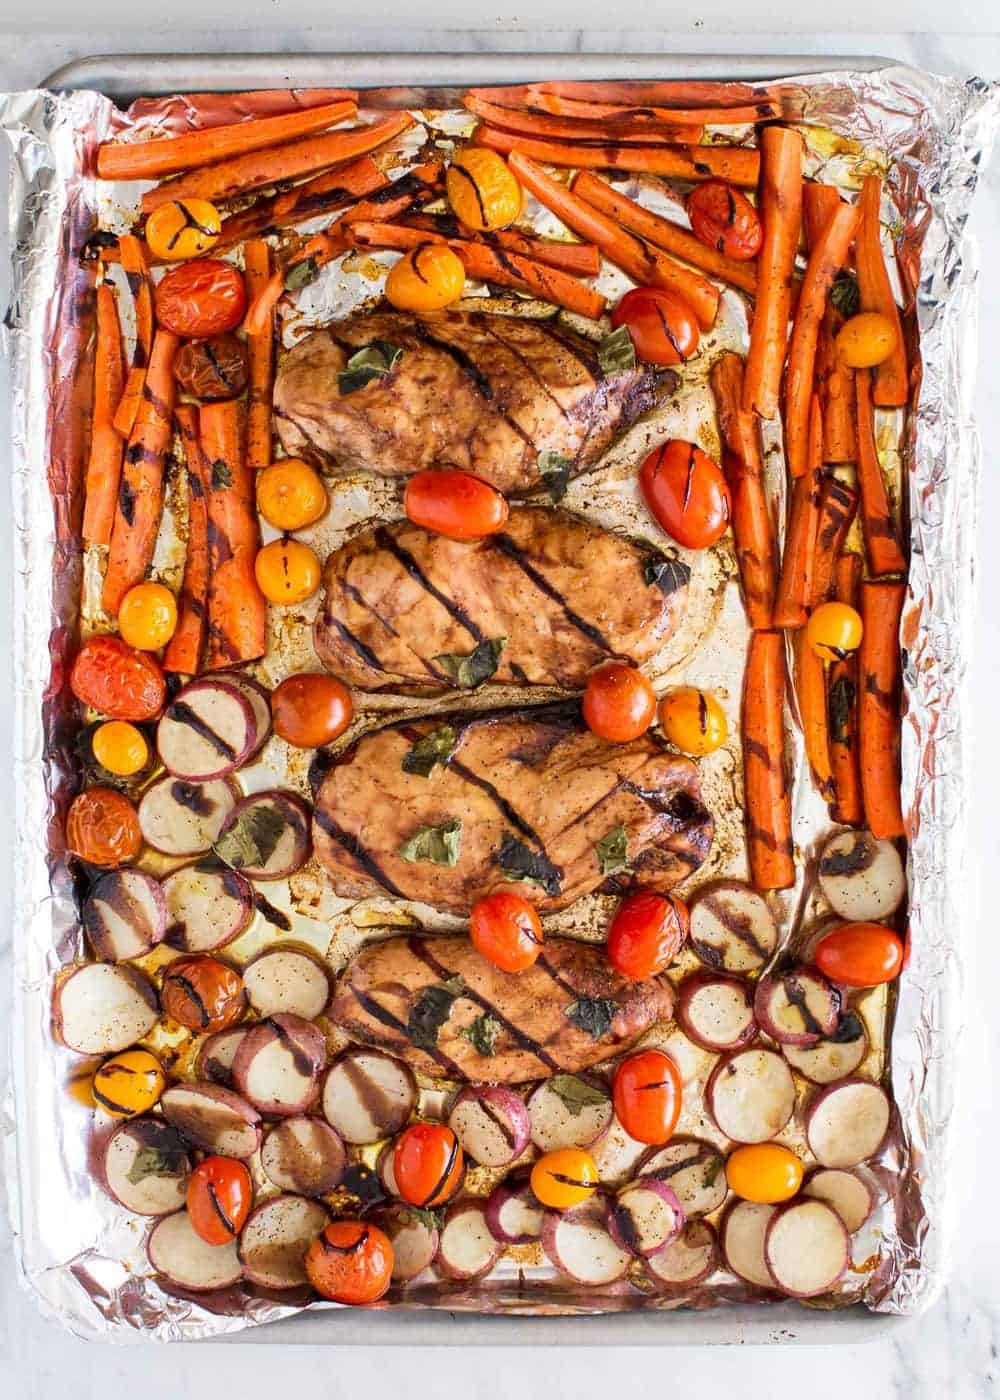 Baked balsamic glazed chicken and vegetables on sheet pan.